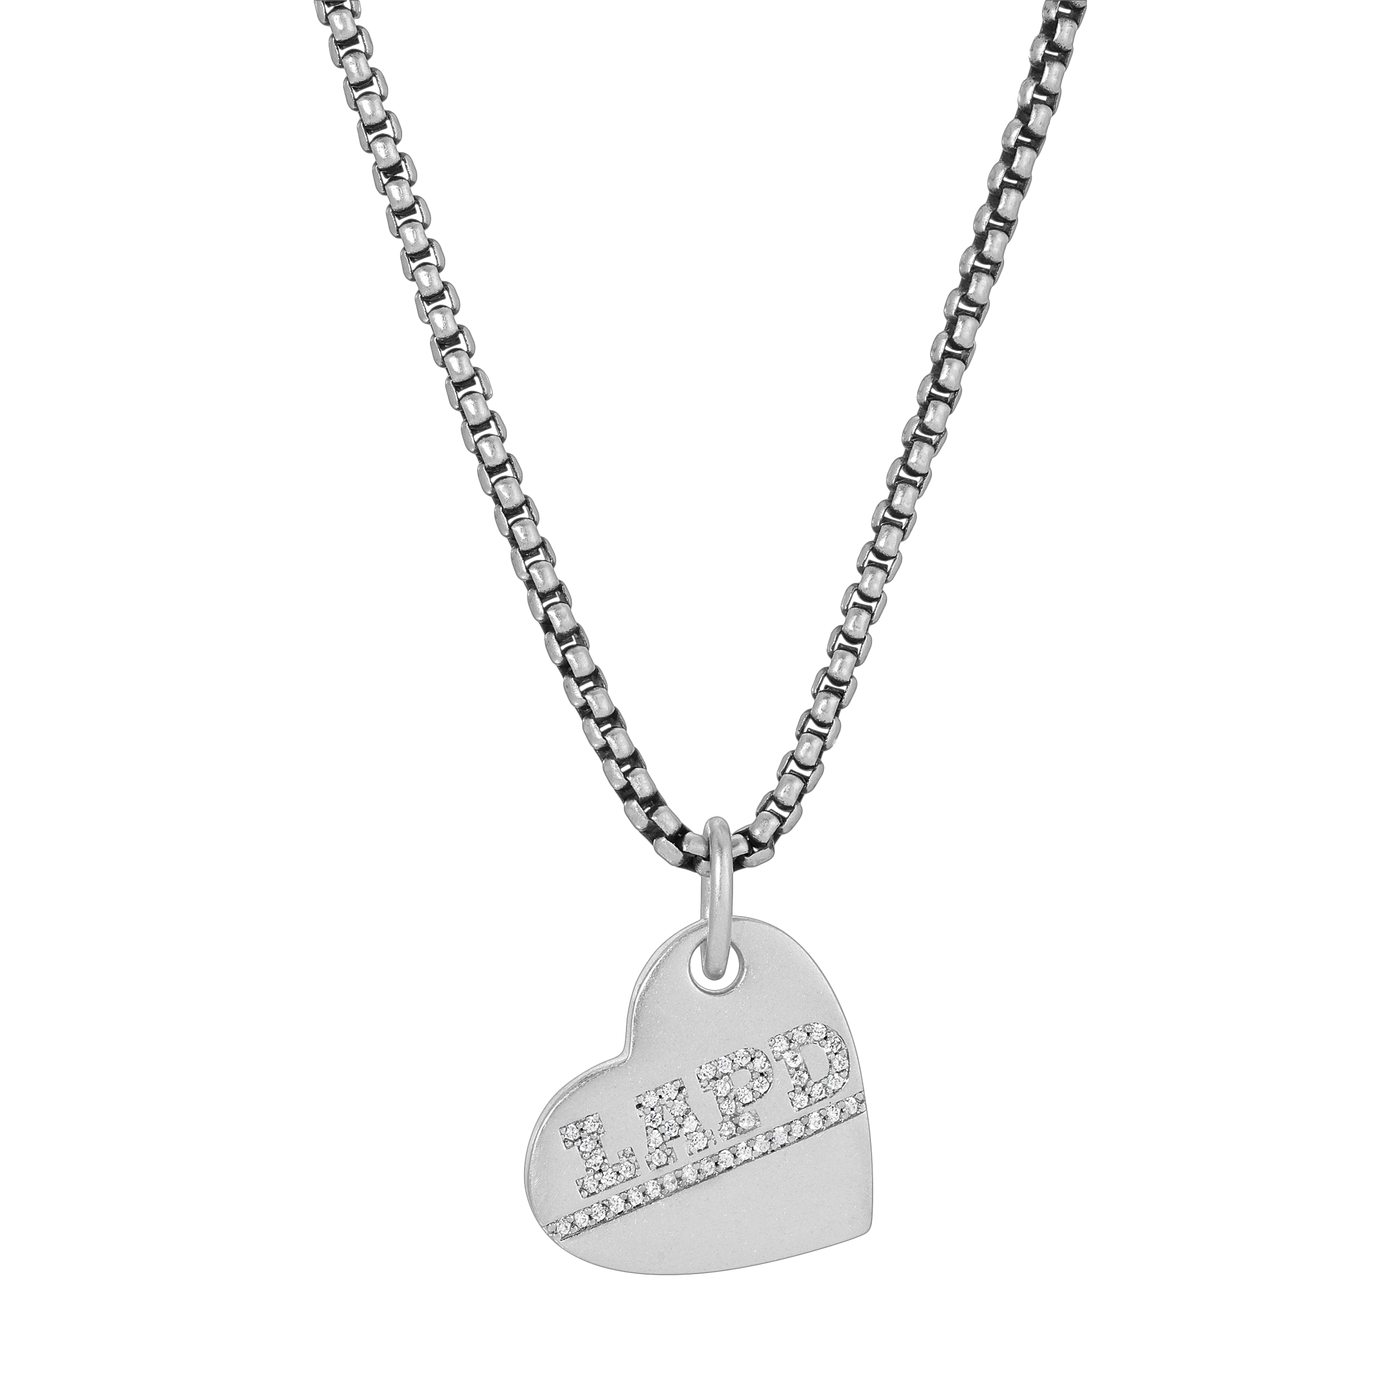 Safety Necklace in Silver